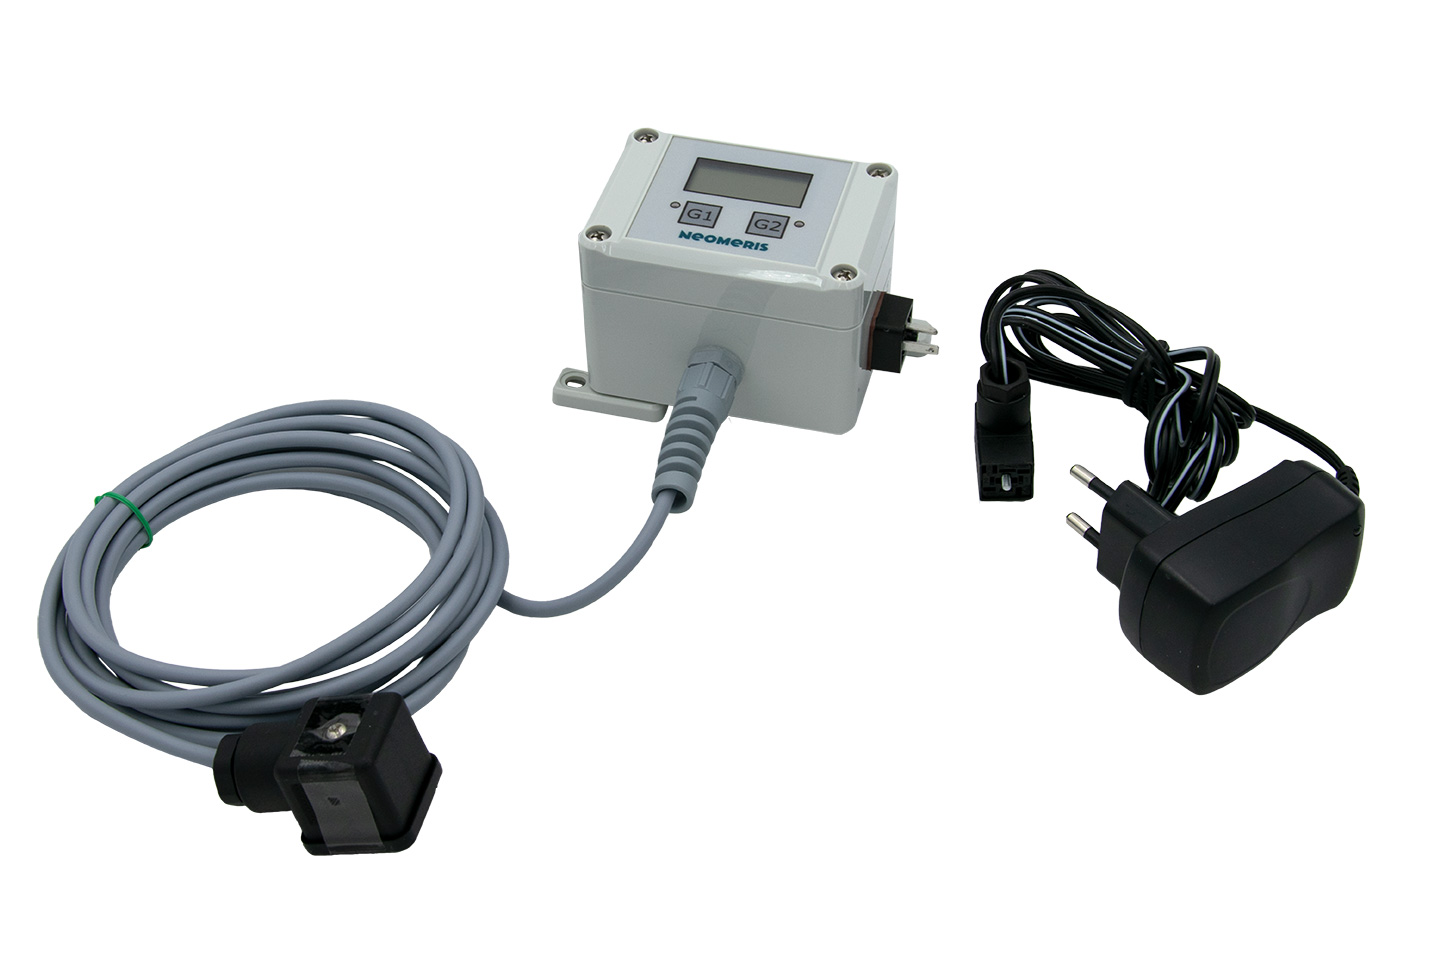 N-LFW, conductivity measuring instrument with 3m hardwired connection cable